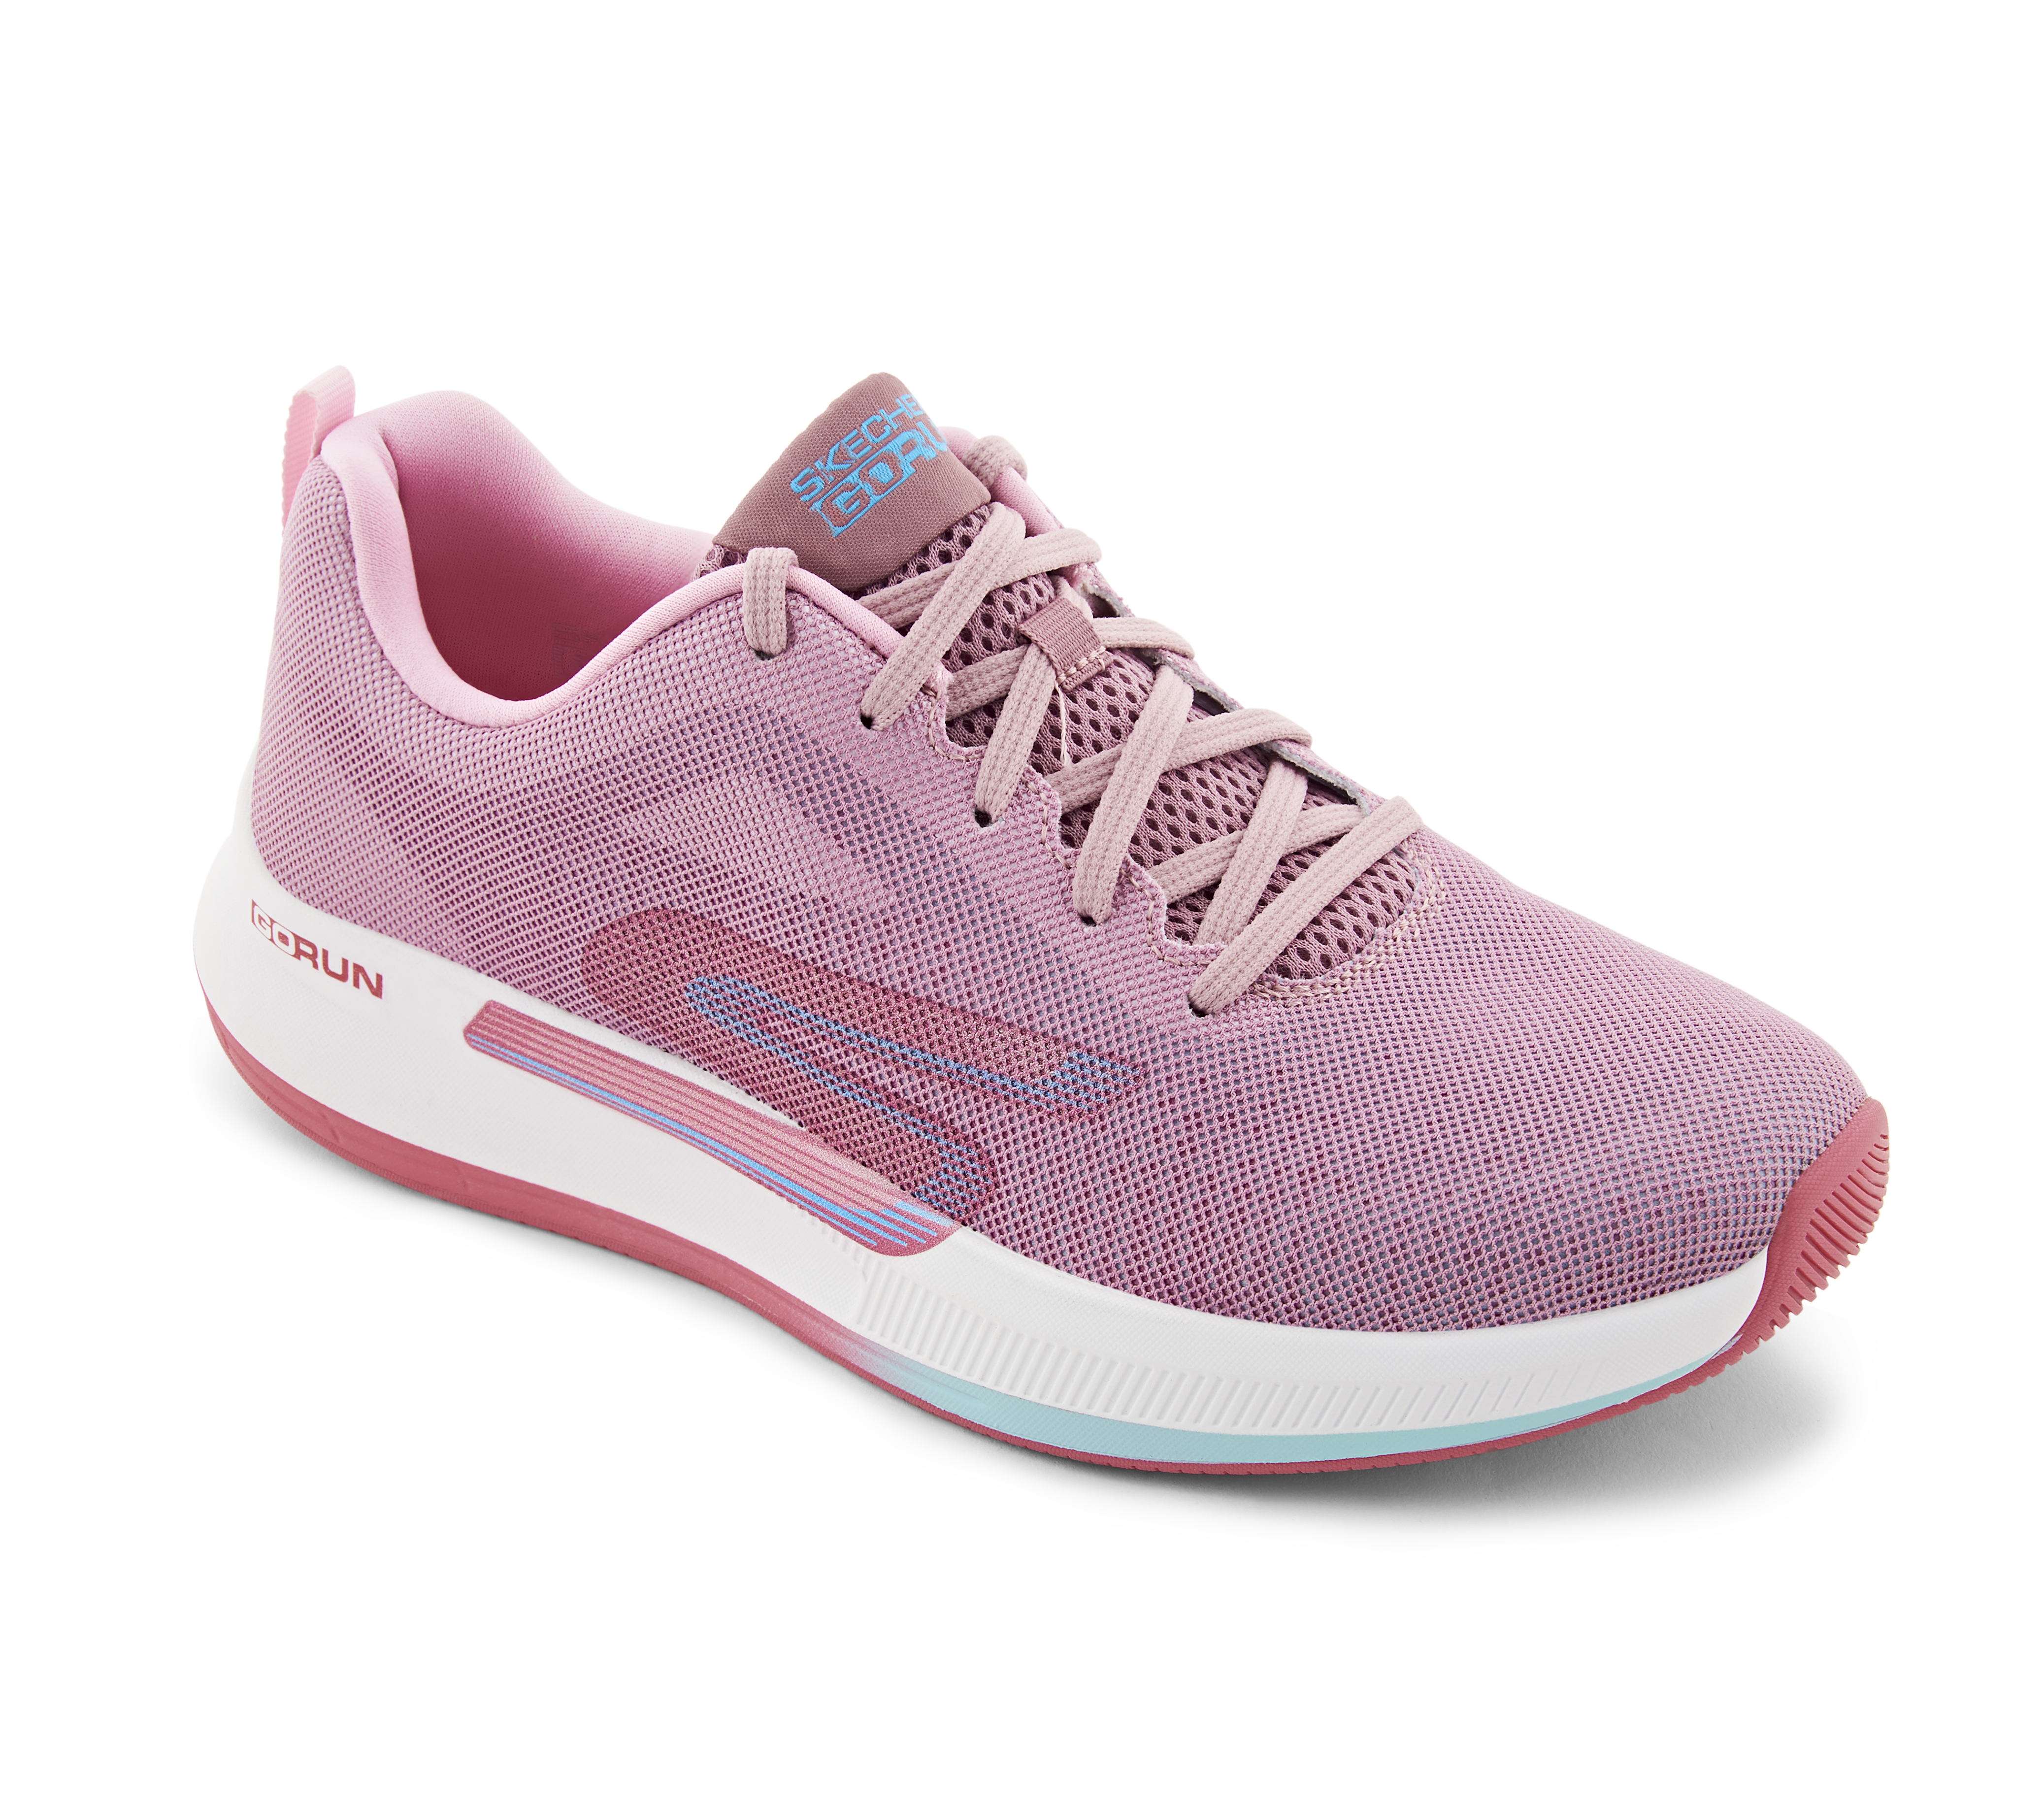 GO RUN PULSE-GET MOVING, MAUVE/MULTI Footwear Lateral View